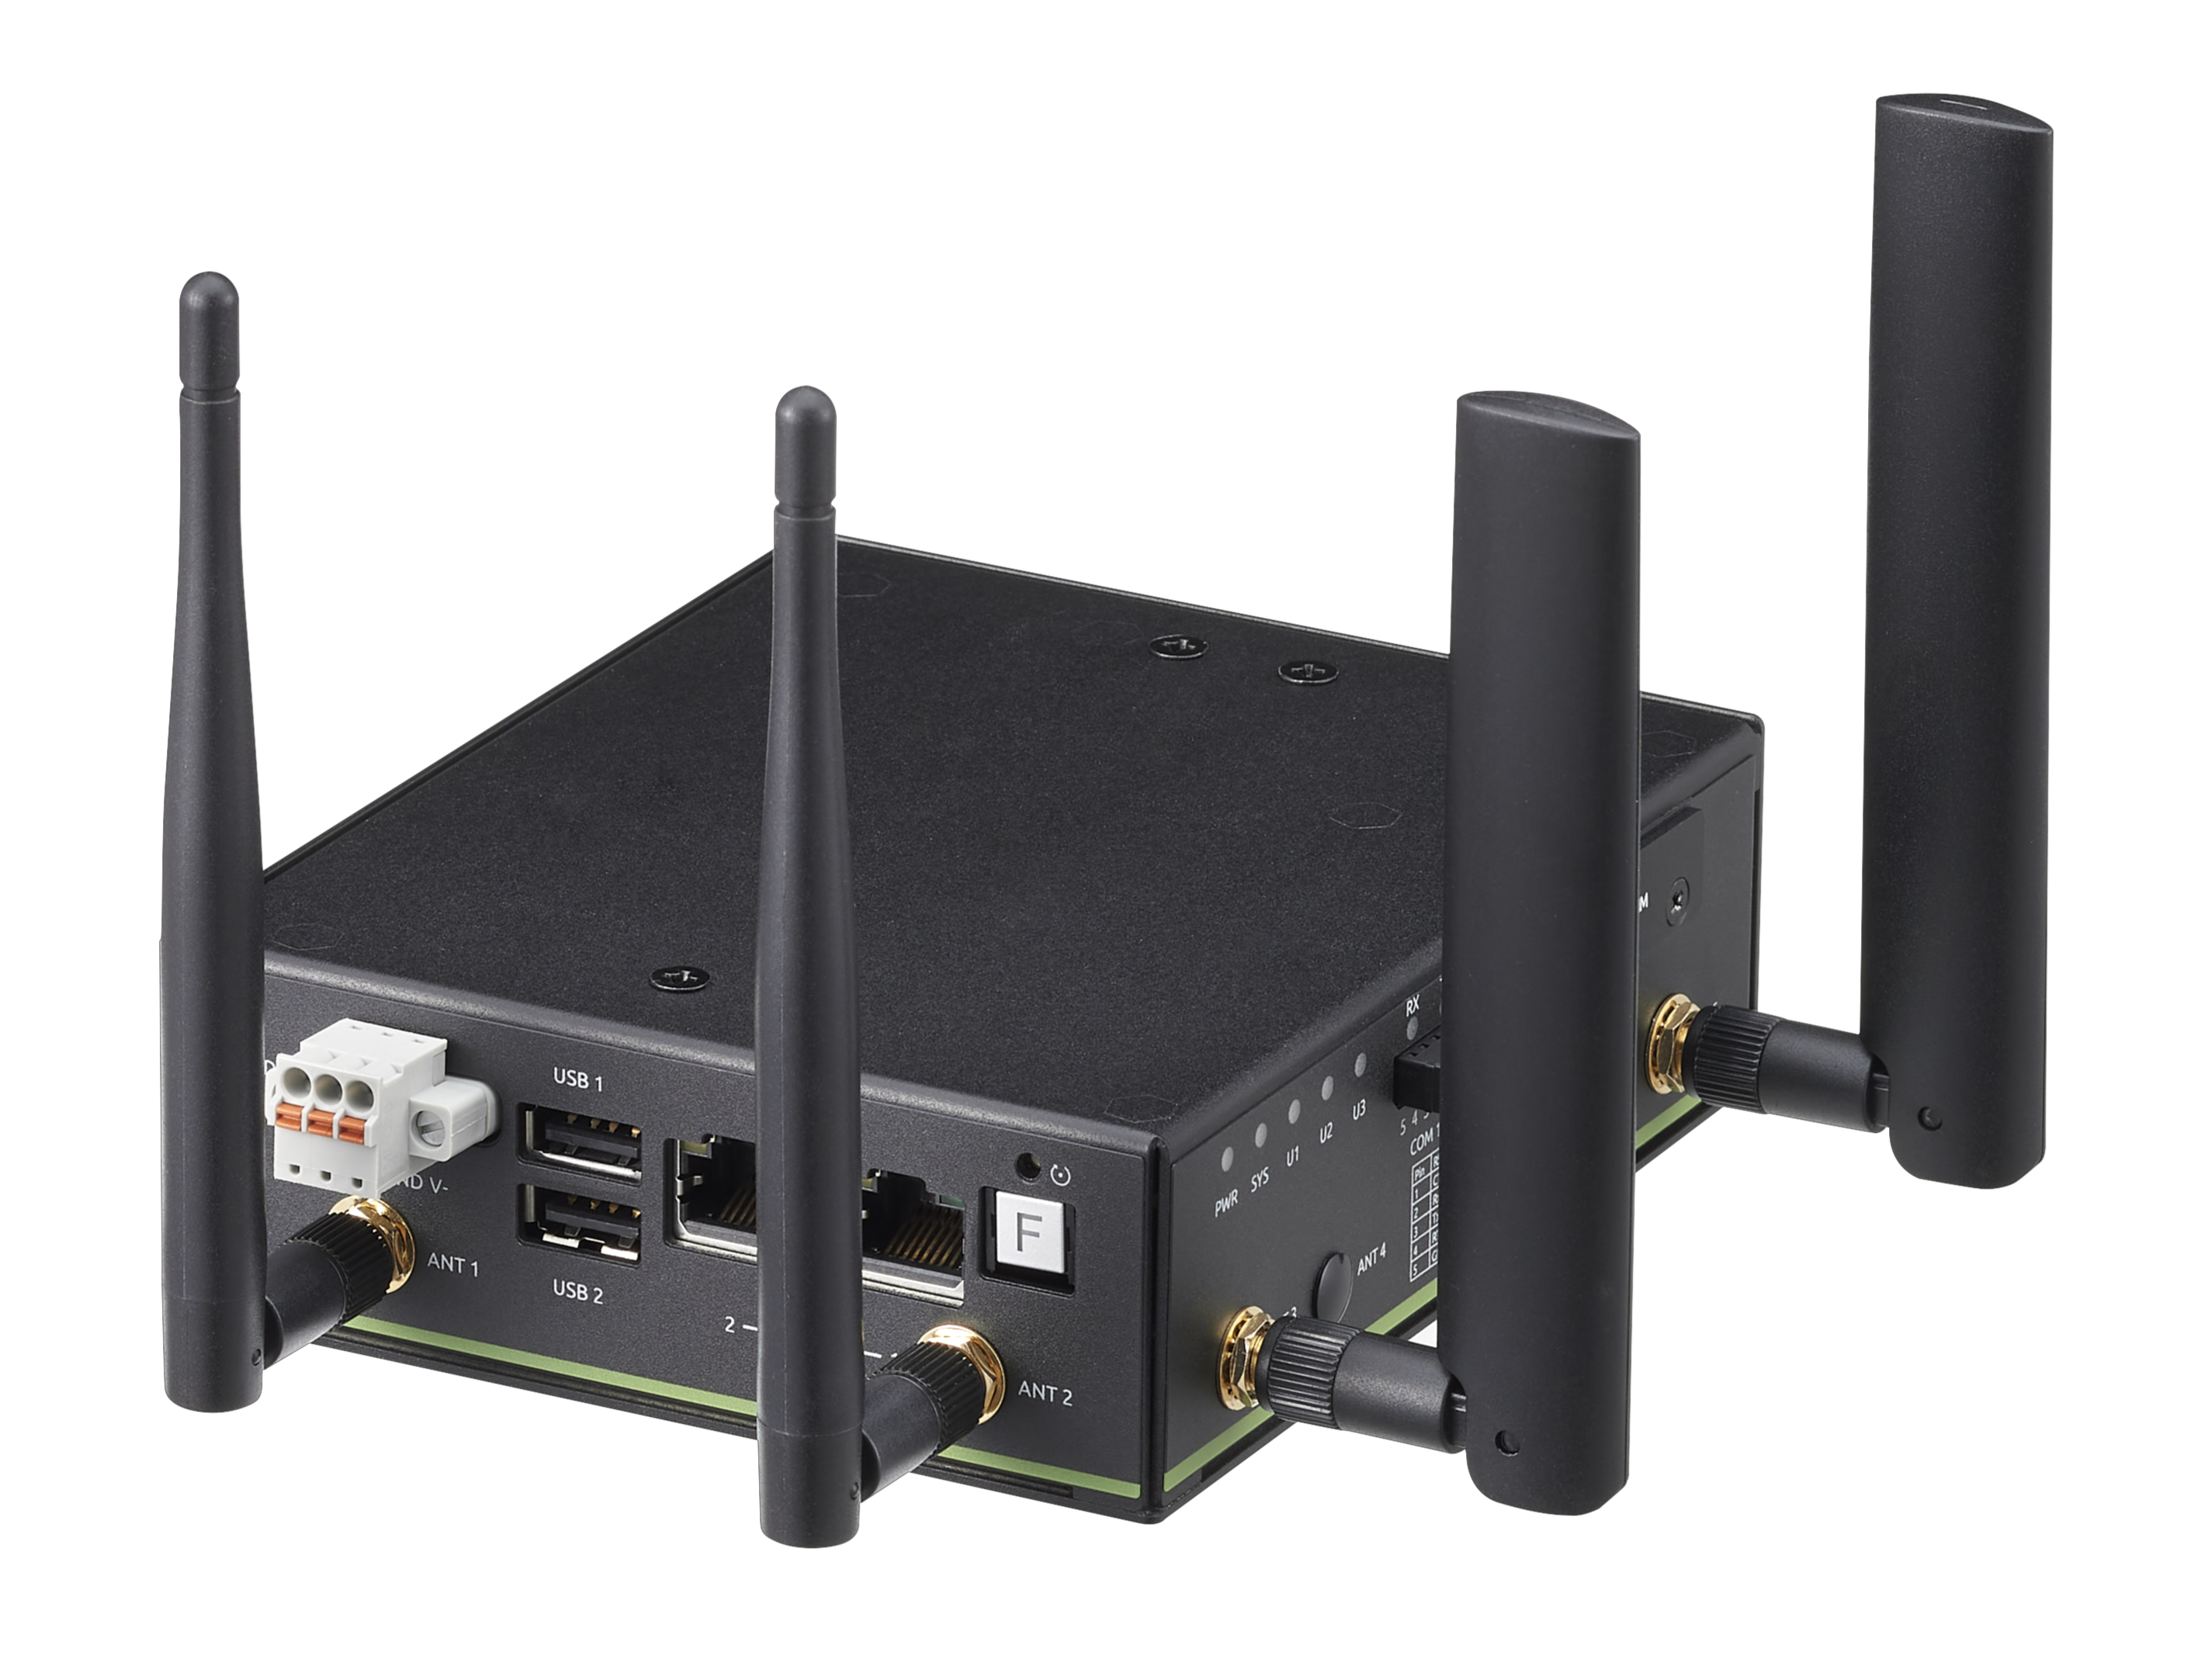 EMU-200 Series, Arm-based Application Ready and Programmable IIoT Gateway